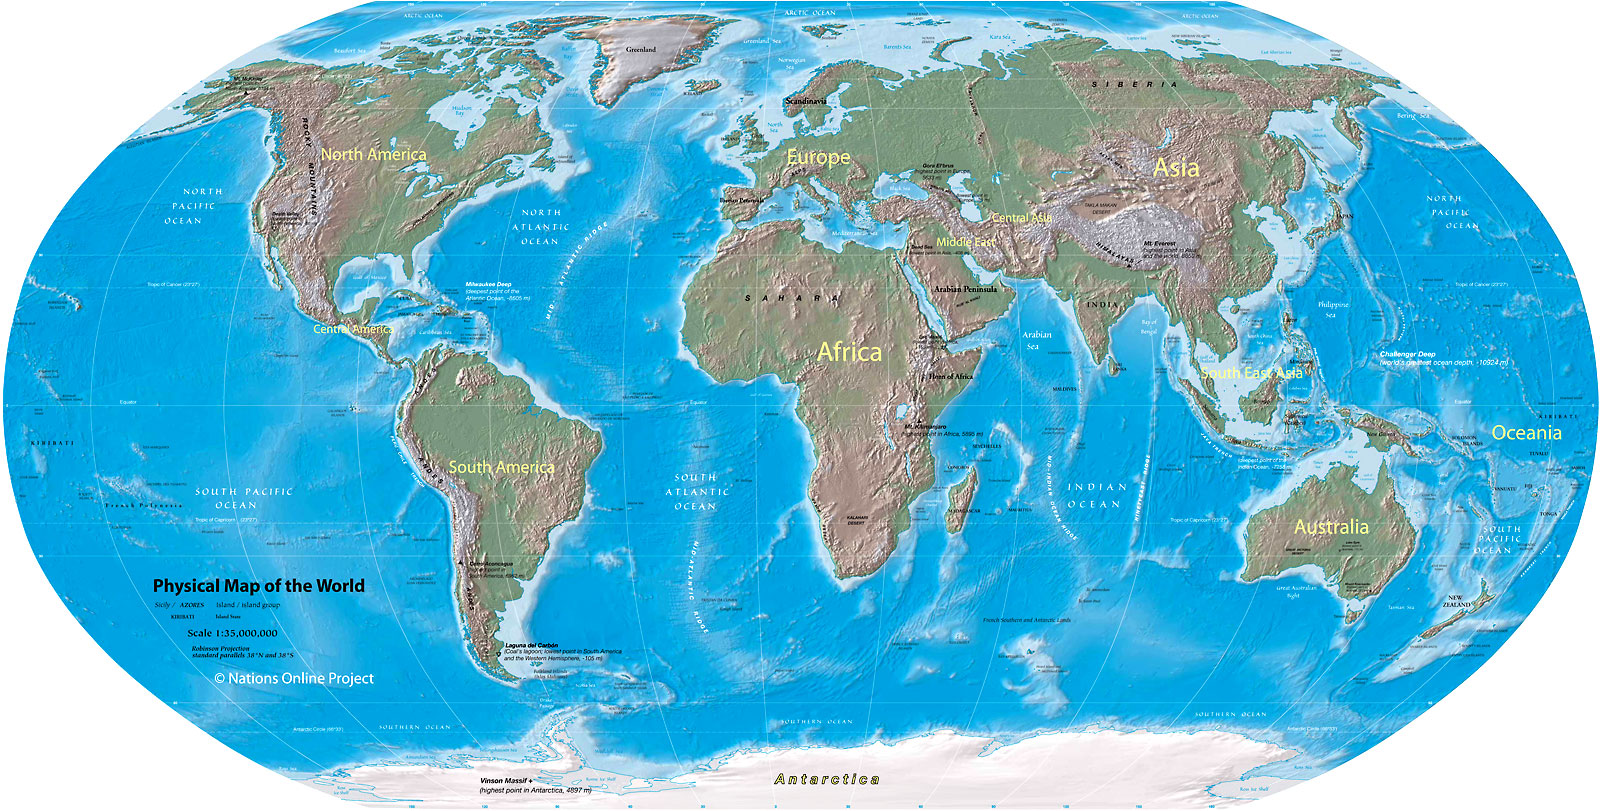 Physical Map Of The World World Map   Physical Map of the World   Nations Online Project